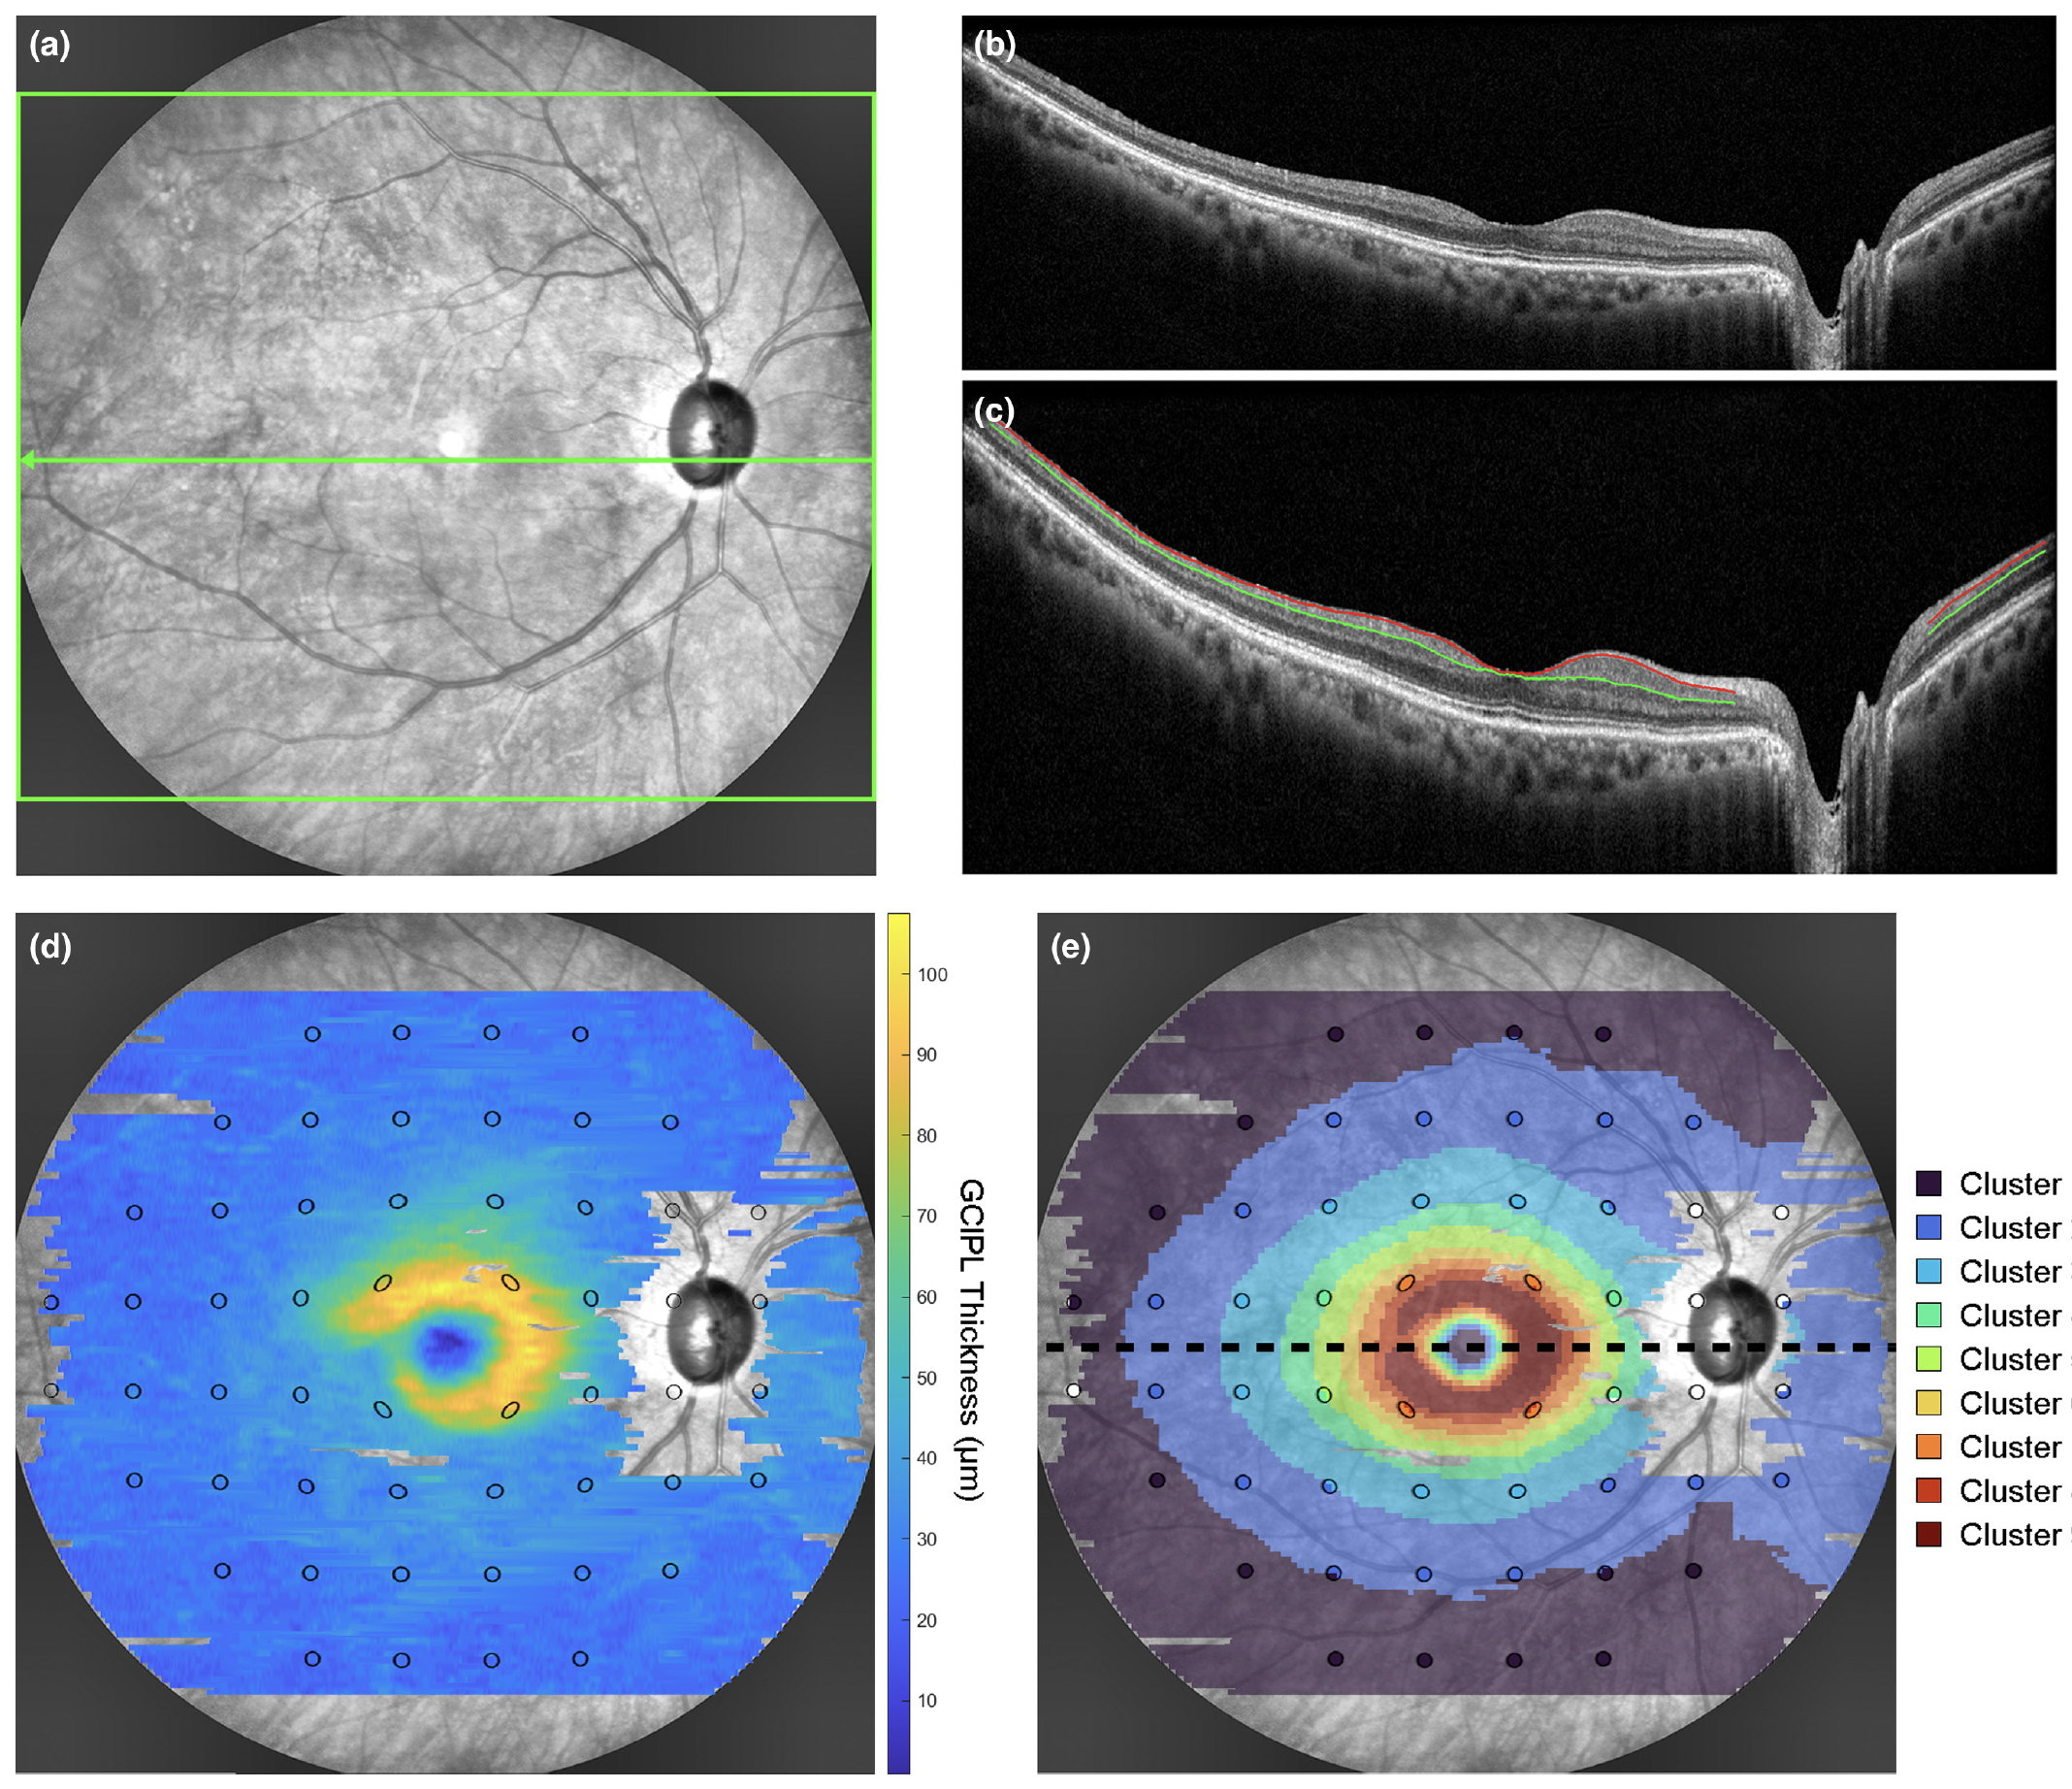 Prediction of VF status based on GCIPL parameters from widefield OCT could become useful to aid clinical decision-making in appropriately targeting VF assessments. This example from the study shows: (a) SLO image with the widefield OCT scan area (green box) and location of the horizontal foveal B-scan (green arrow), (b) the corresponding raw foveal B-scan, (c) the same B-scan with warpage correction applied and segmentation of the RNFL-GC layer (red line) and IPL-INL boundaries (green line) to derive the GCIPL, (d) the GCIPL thickness map across the widefield OCT scan area with 24-2 visual field test locations (black ellipses) superimposed, and (e) the corresponding cluster arrangement describing the spatial pattern of age-related change in GCIPL thickness. 